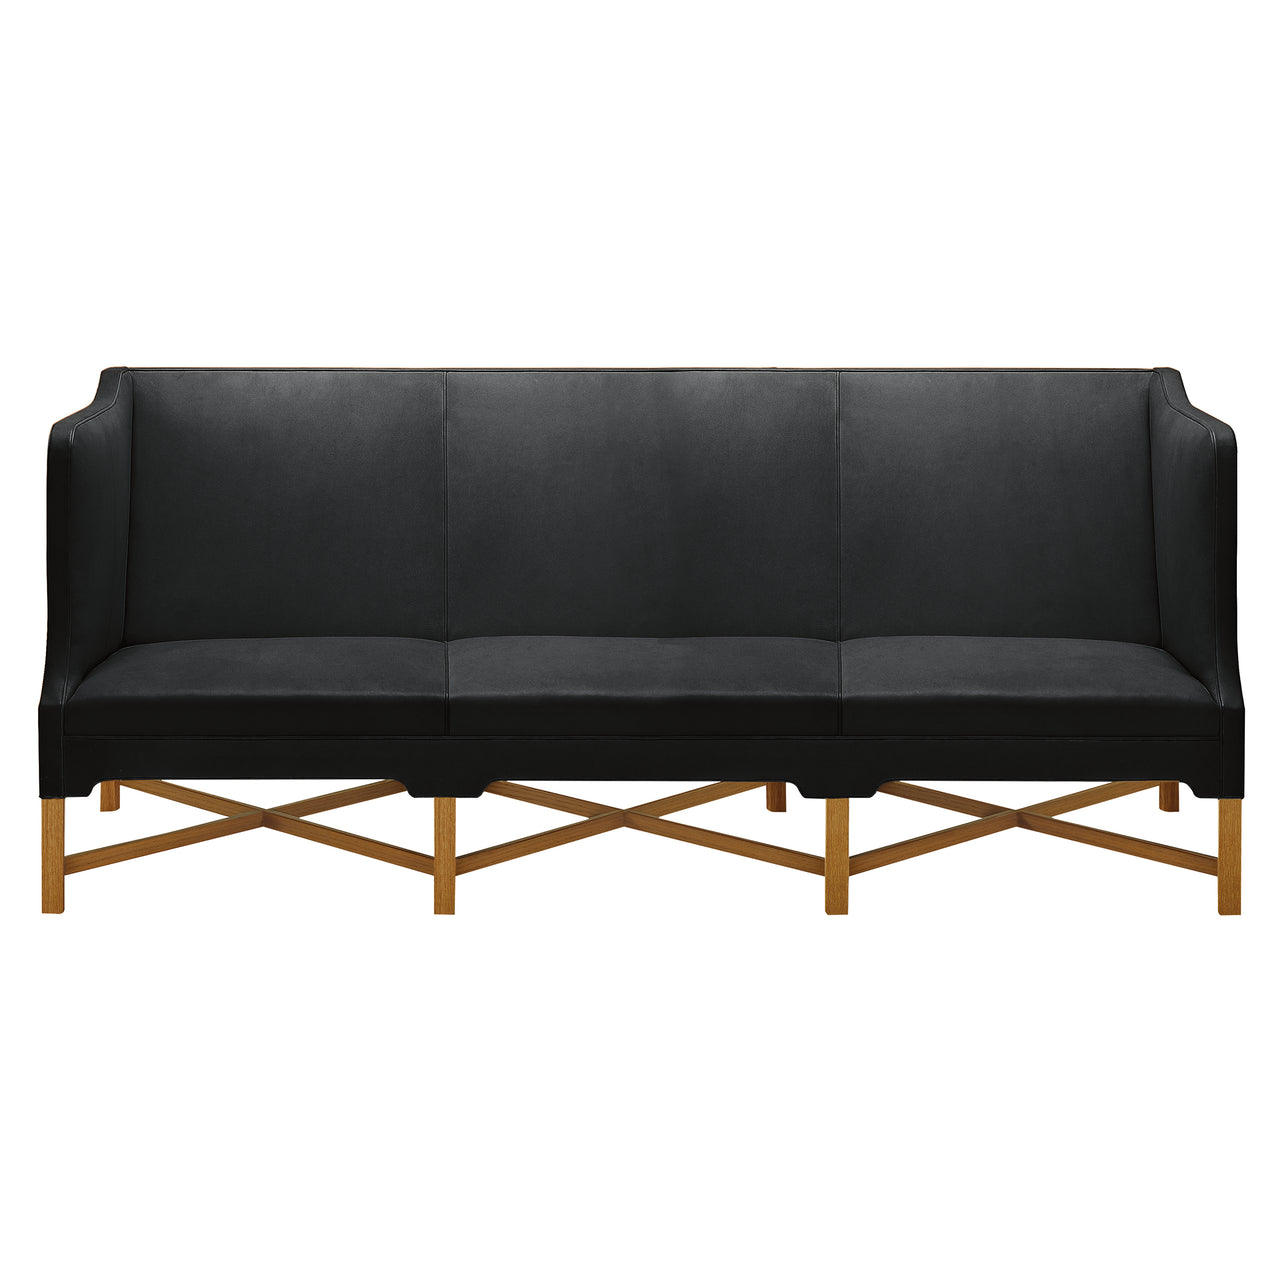 Sofa with High Sides: 3 Seater + Oiled Oak